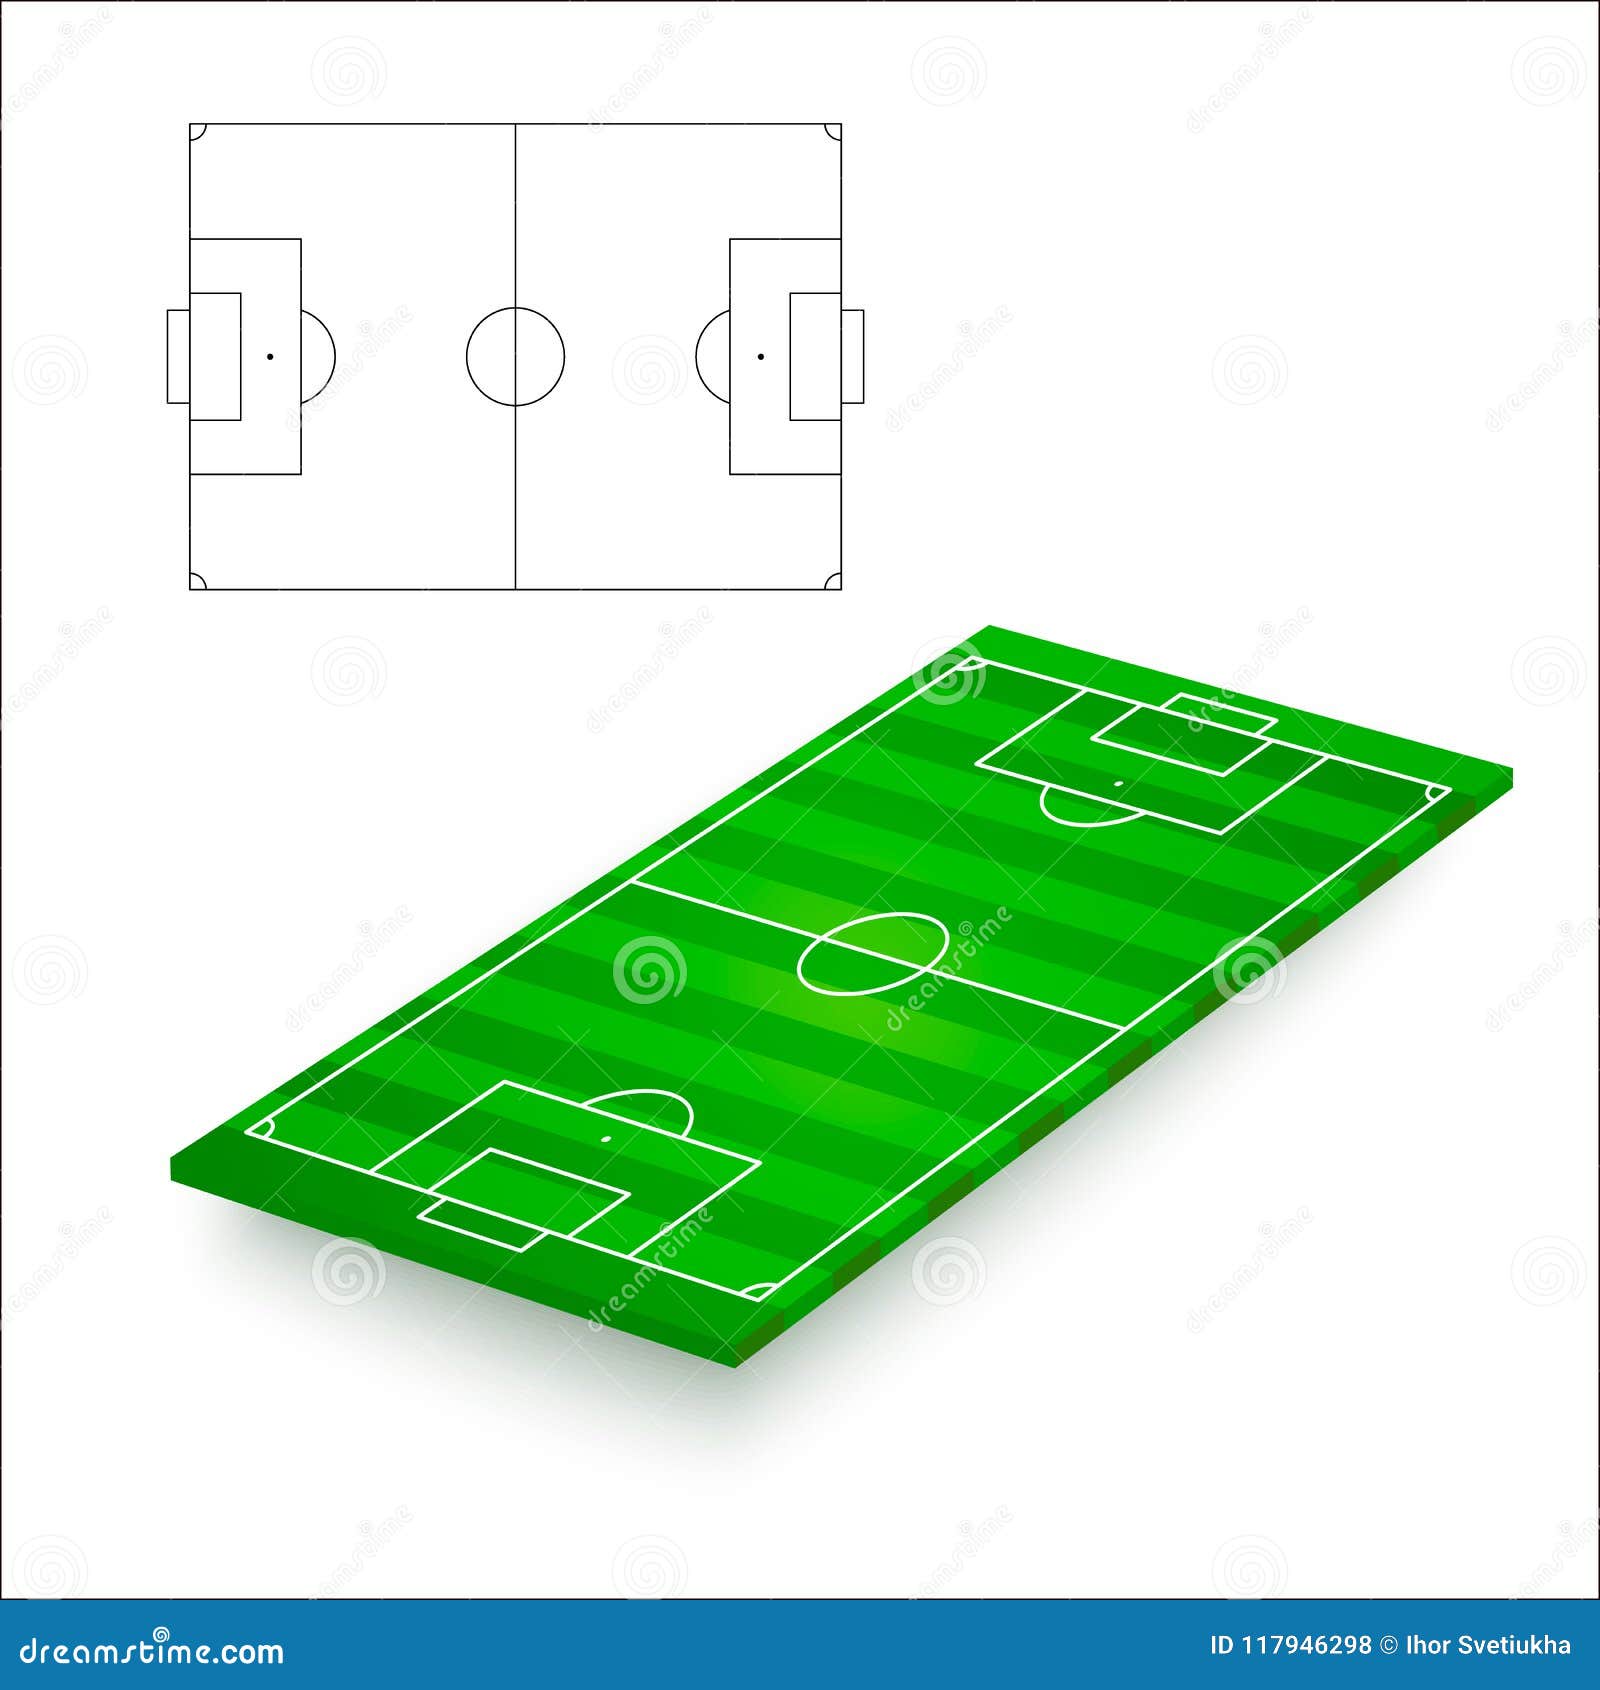 Football Field Drawing Images  Free Download on Freepik